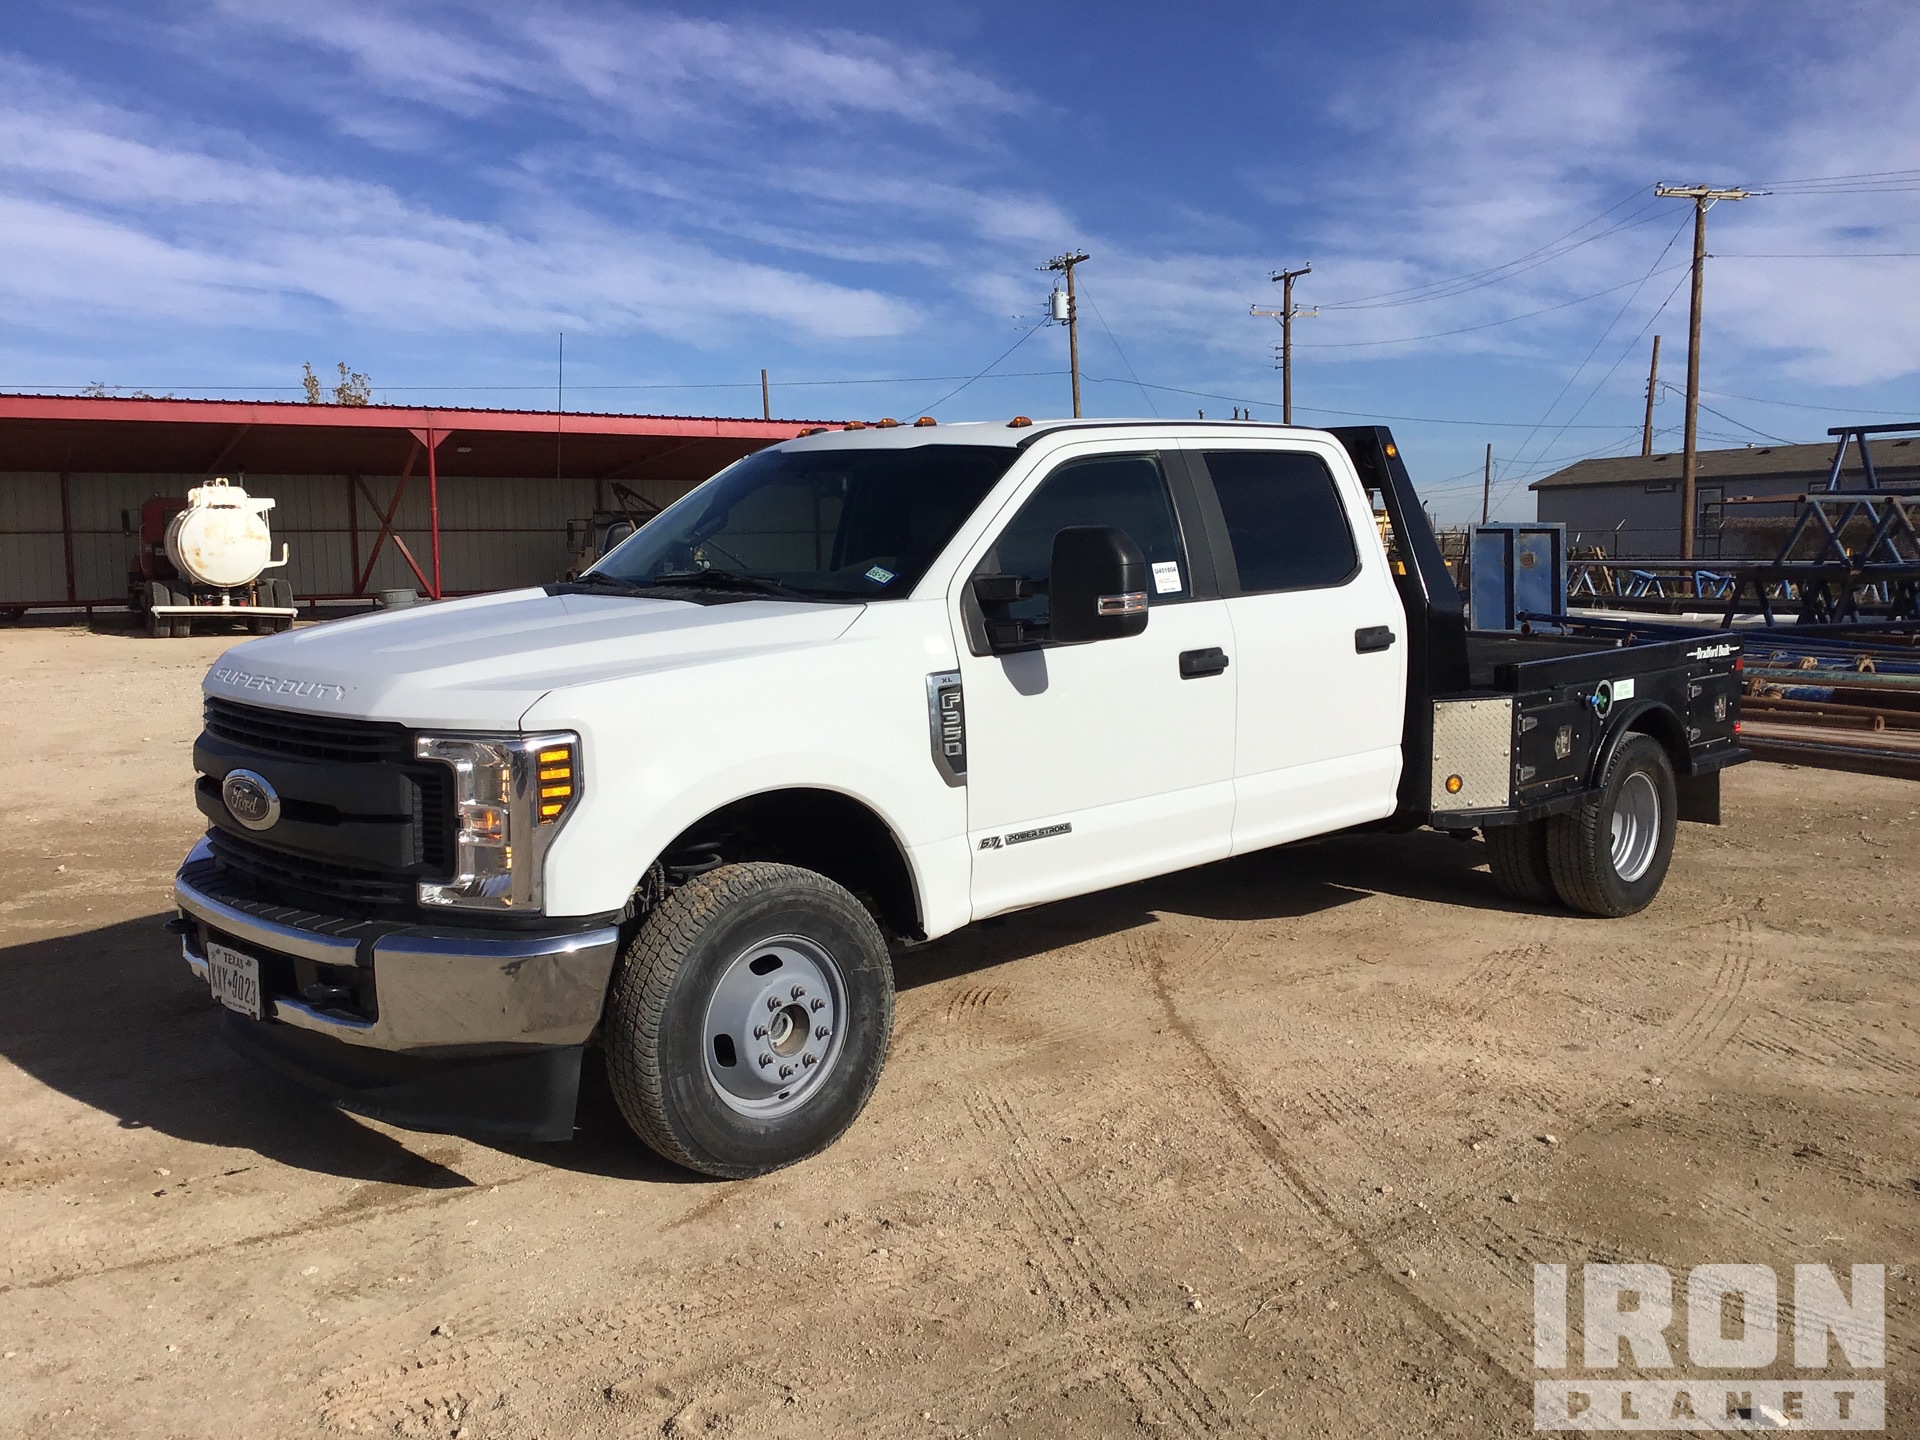 2018 Ford F 350 XL 4x4 Crew Cab Flatbed Truck in Odessa, Texas, United  States (TruckPlanet Item #8818409)